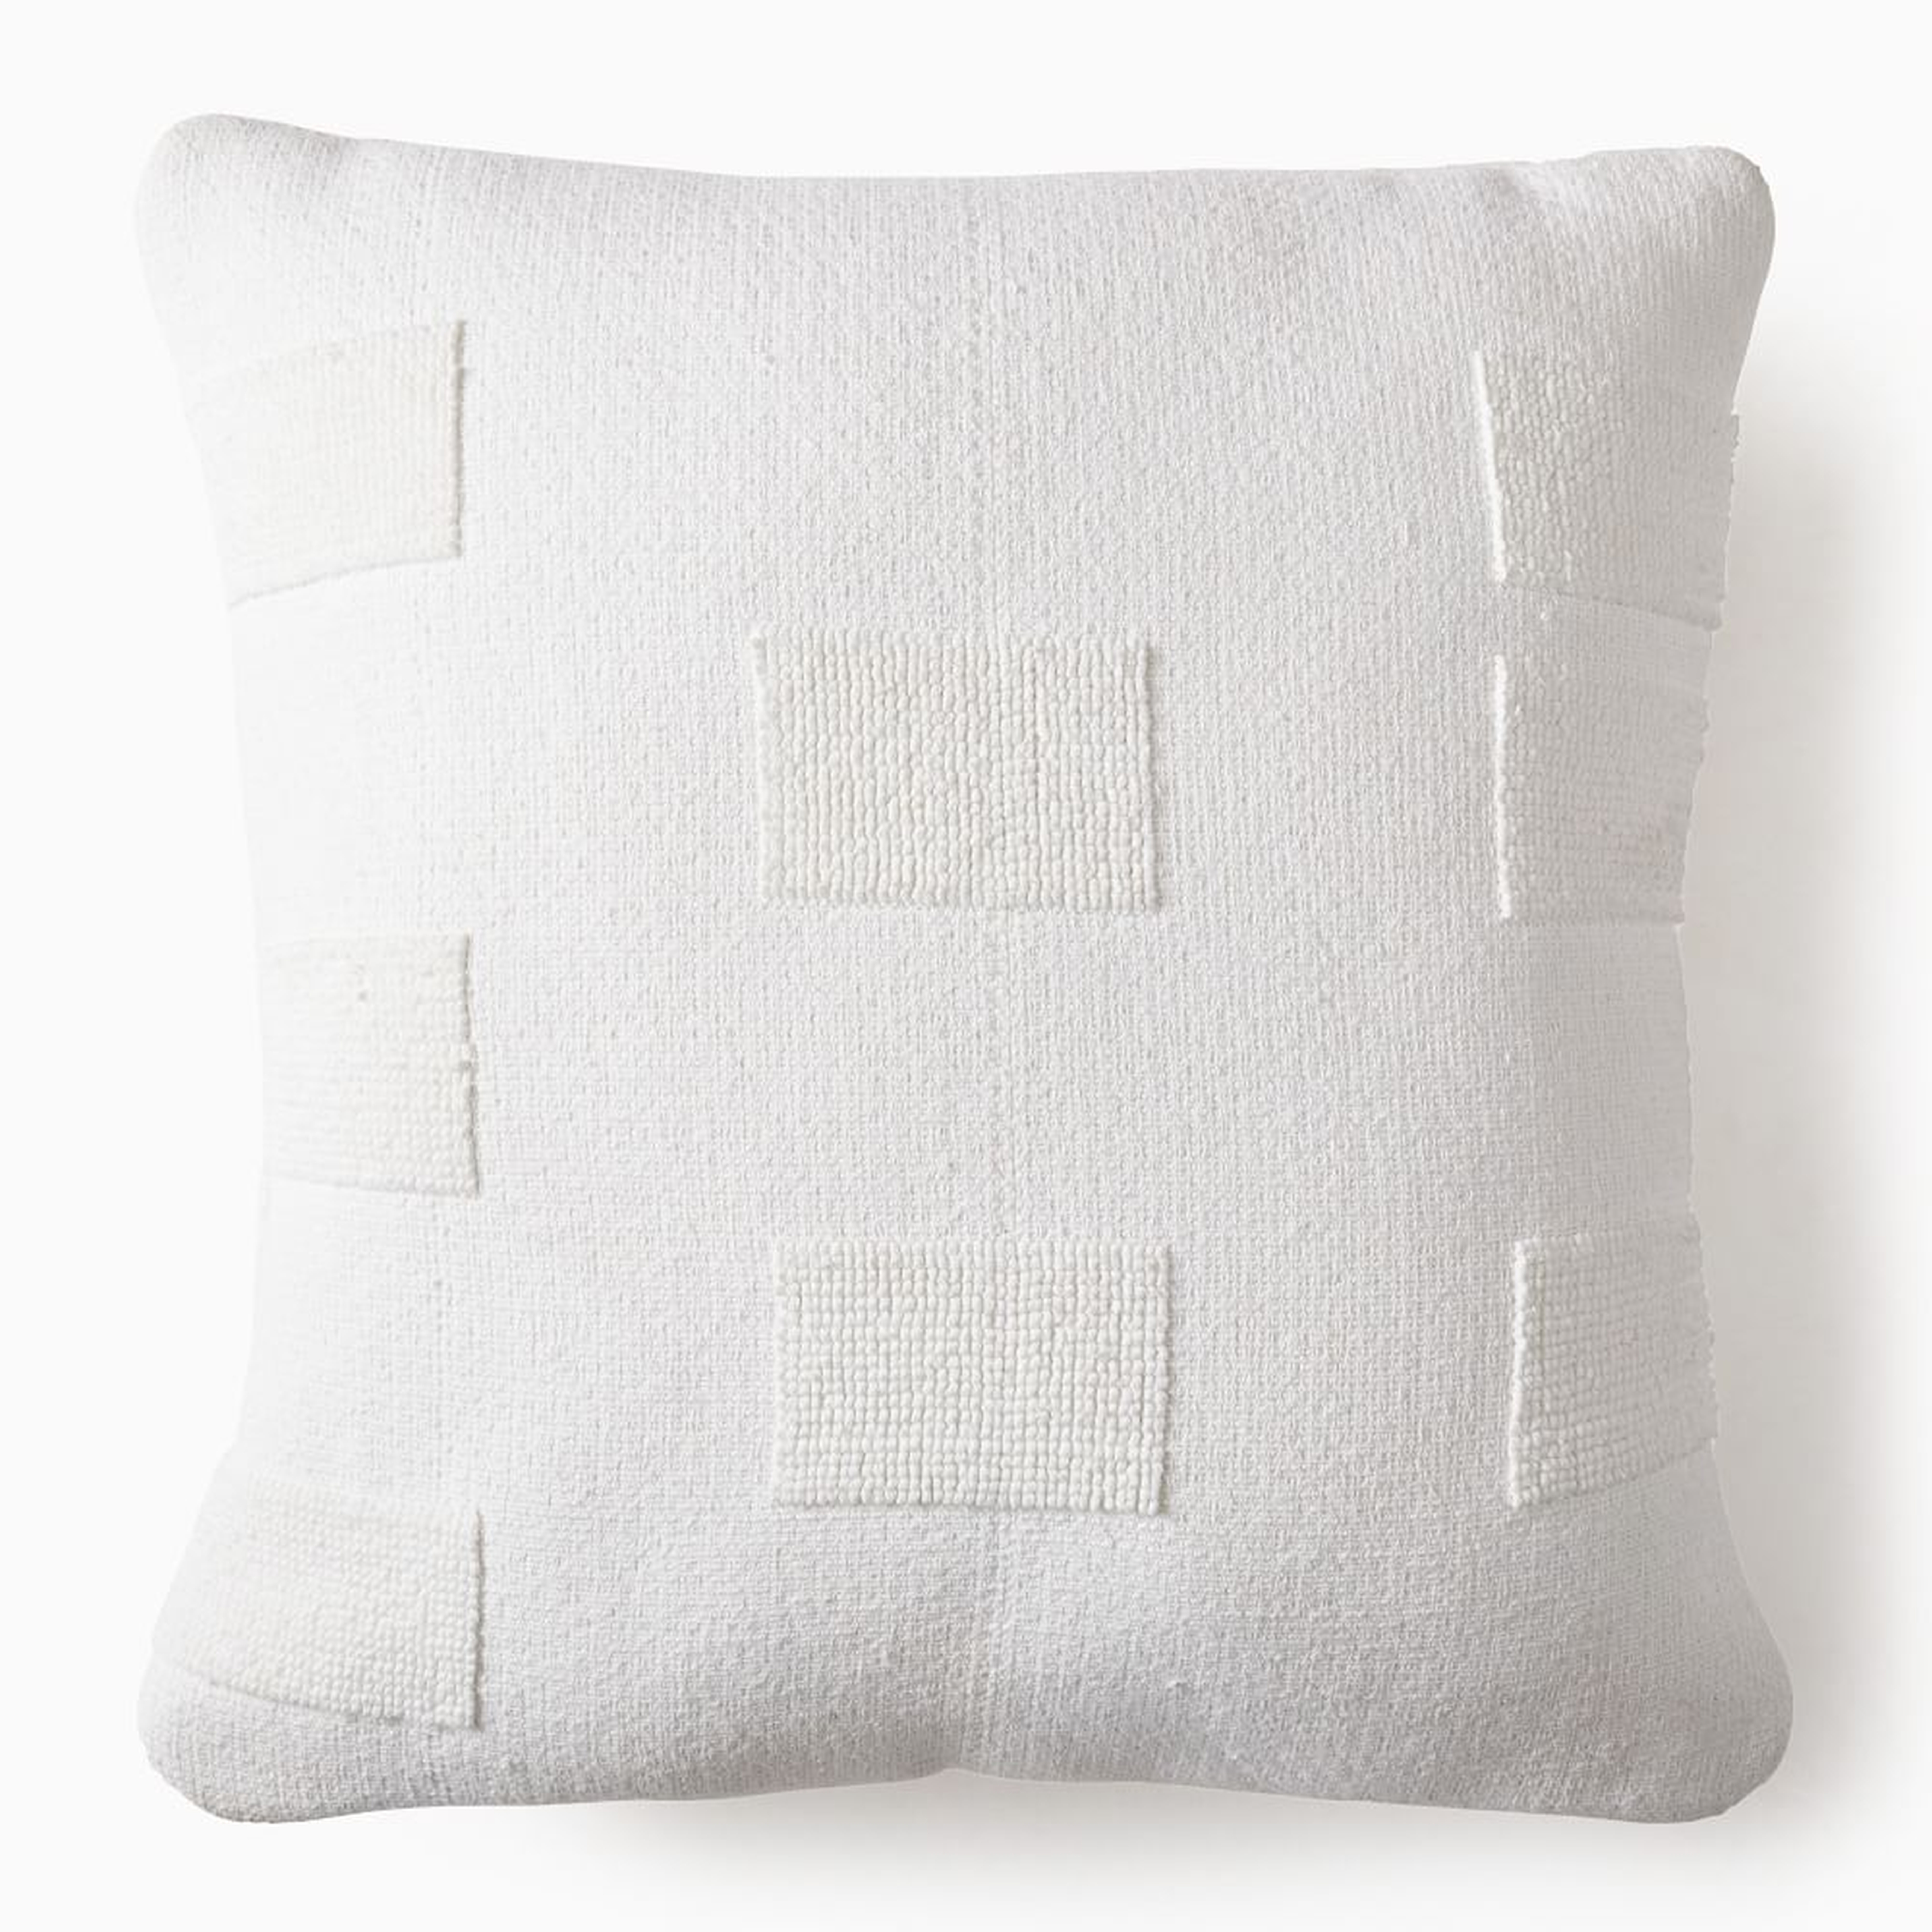 Outdoor Tufted Pillow, 24"x24", White, Set of 2 - West Elm